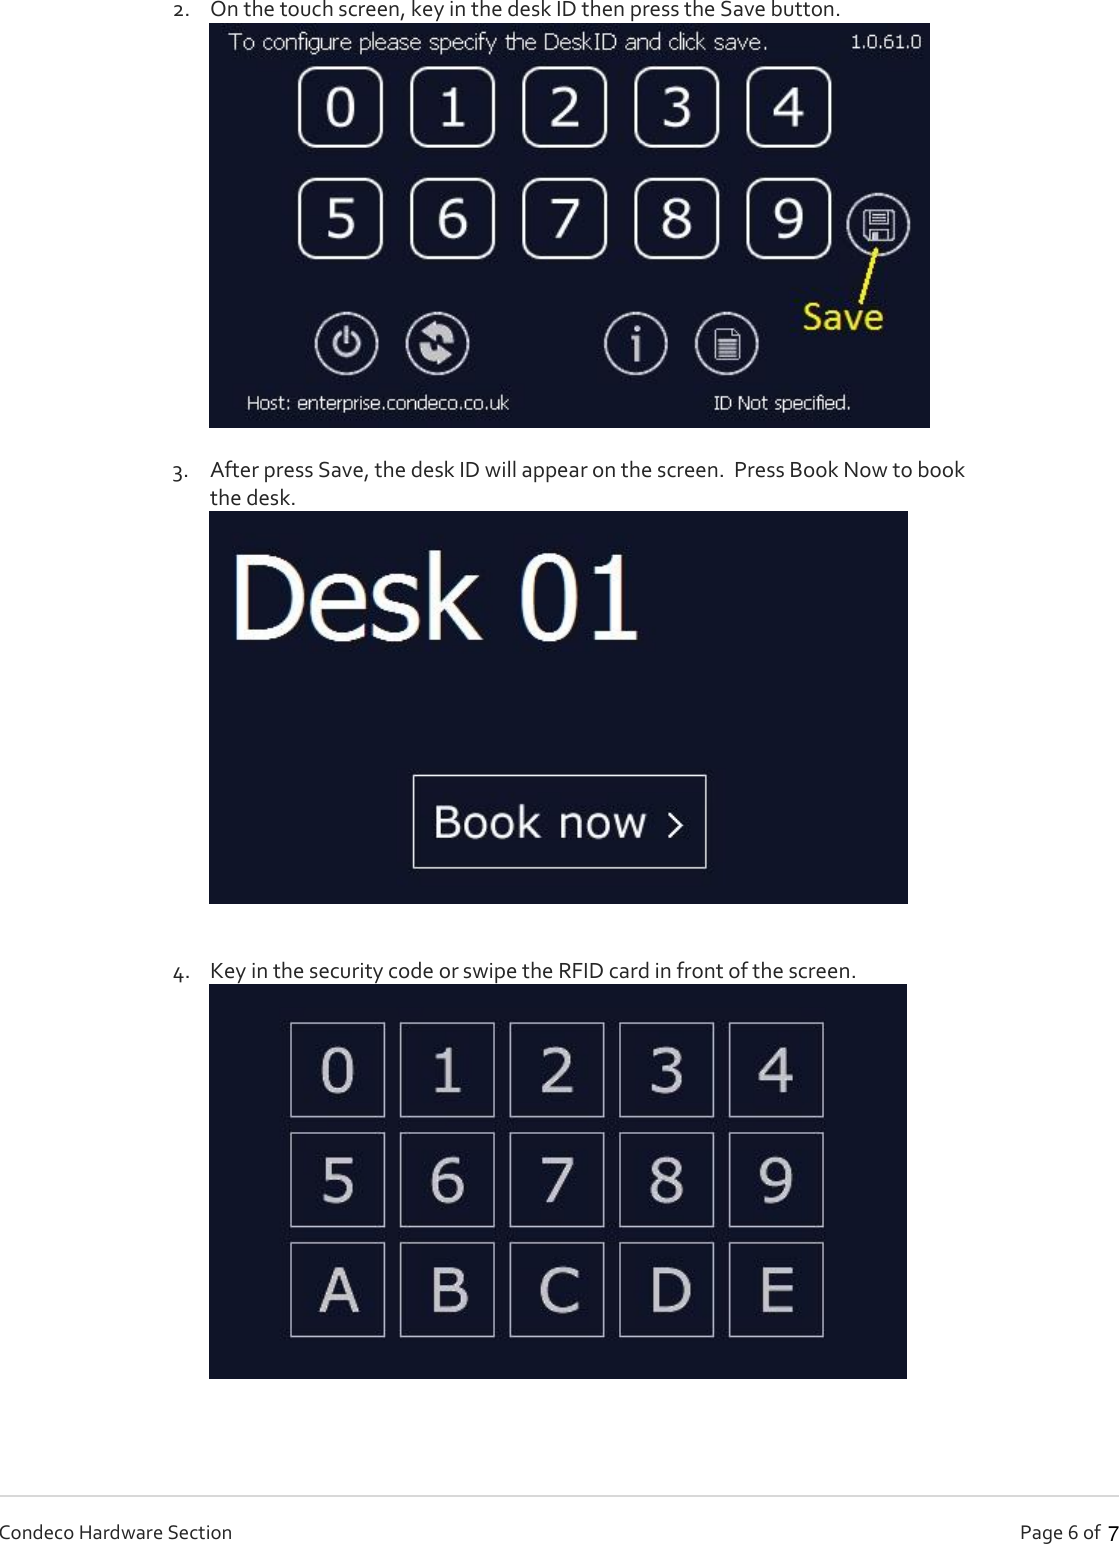   Page 6 of   Condeco Hardware Section 2. On the touch screen, key in the desk ID then press the Save button.   3. After press Save, the desk ID will appear on the screen.  Press Book Now to book the desk.   4. Key in the security code or swipe the RFID card in front of the screen.  7